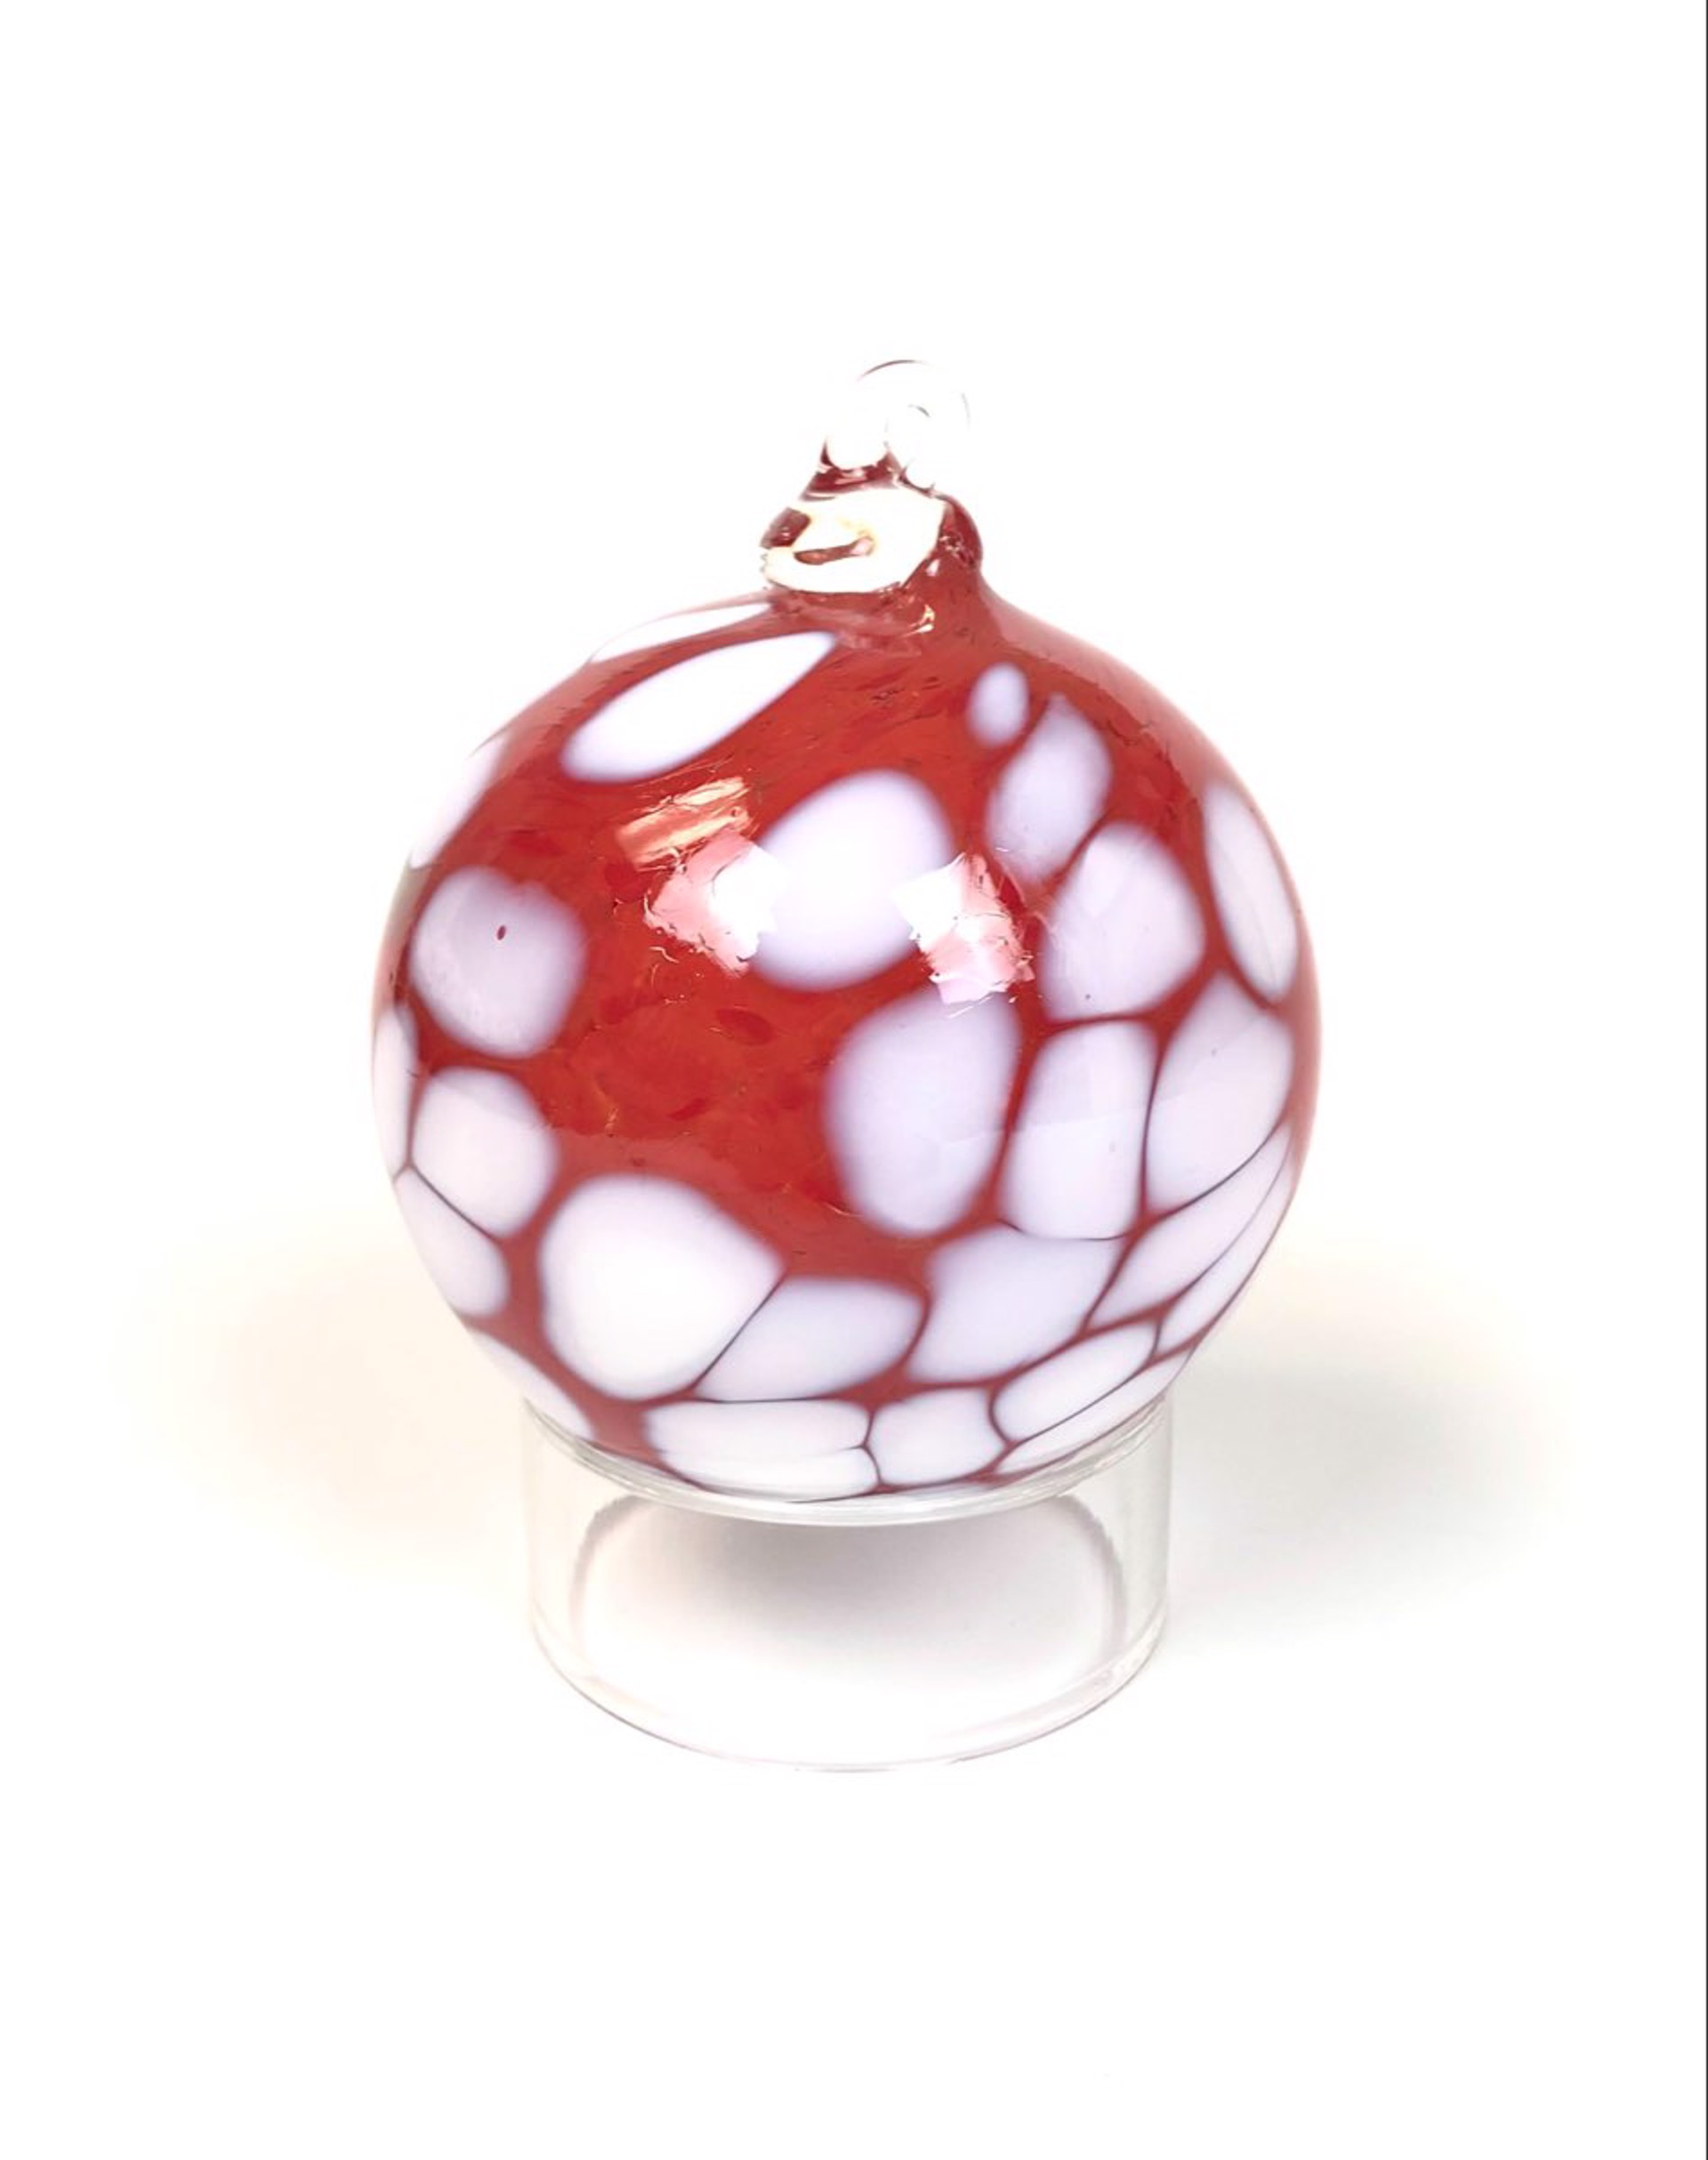 Ornament  by Chad Balster